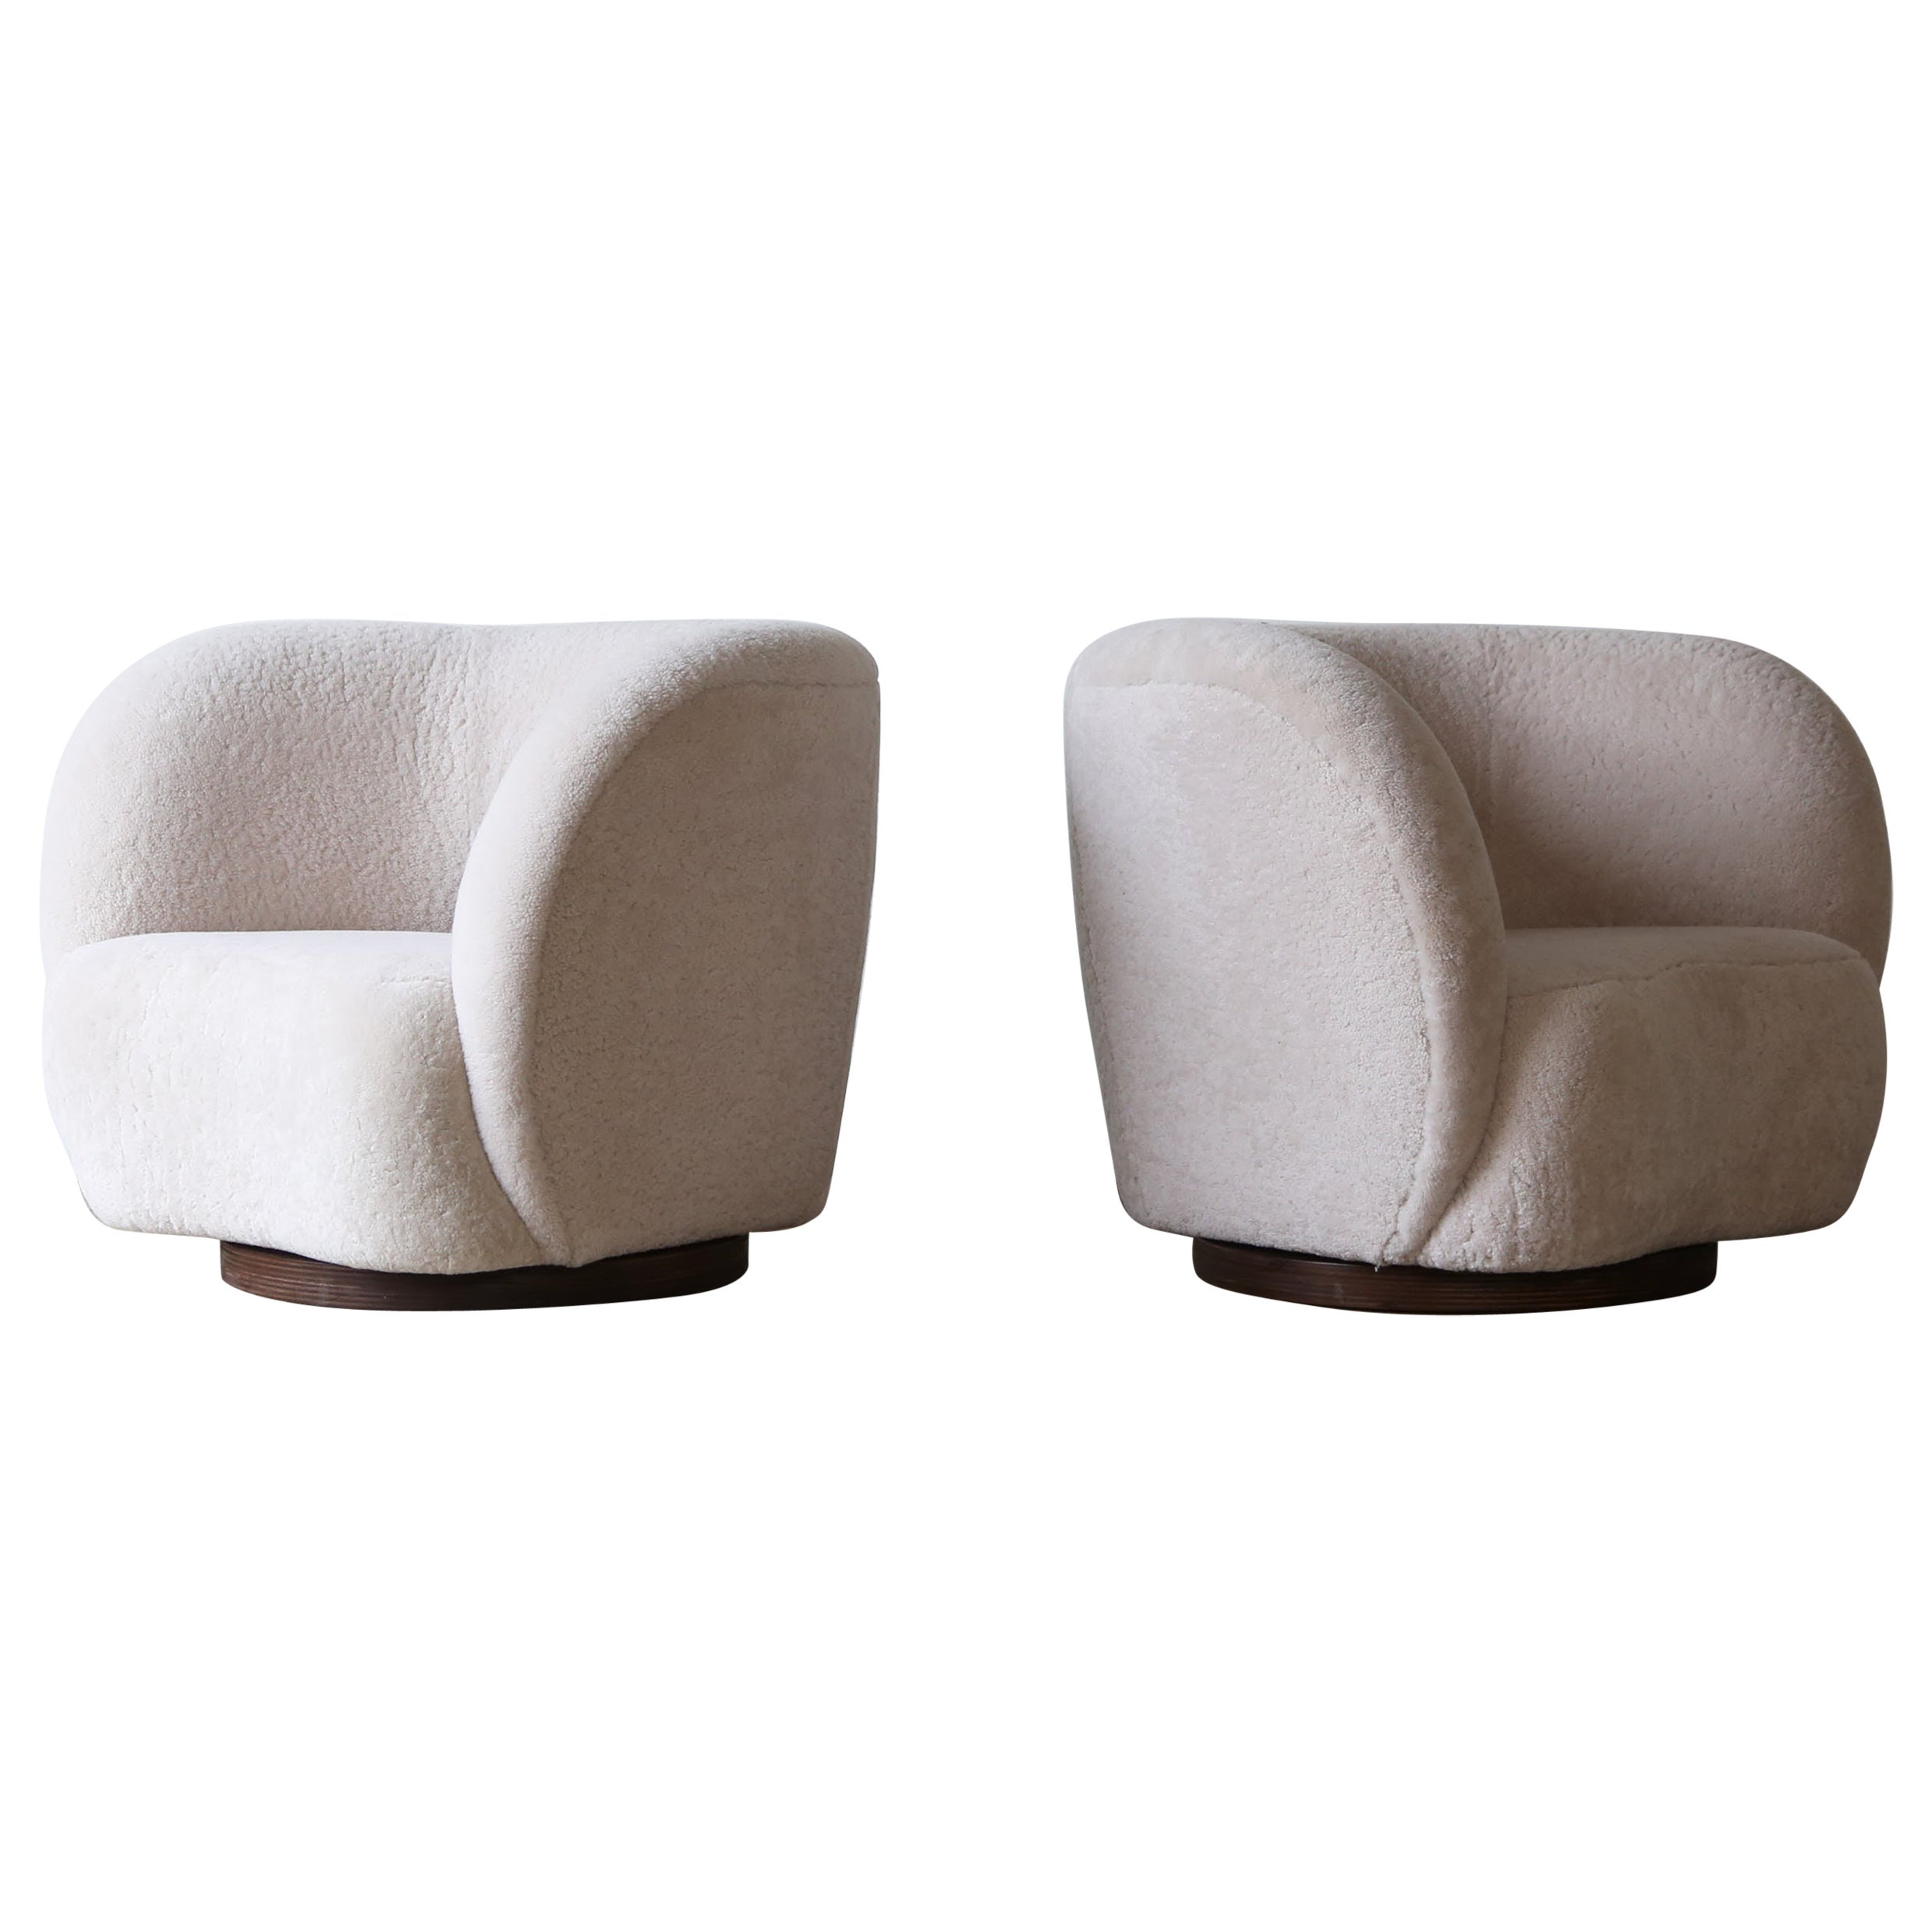 A Pair of Swivel Lounge Chairs in Natural Sheepskin Upholstery For Sale